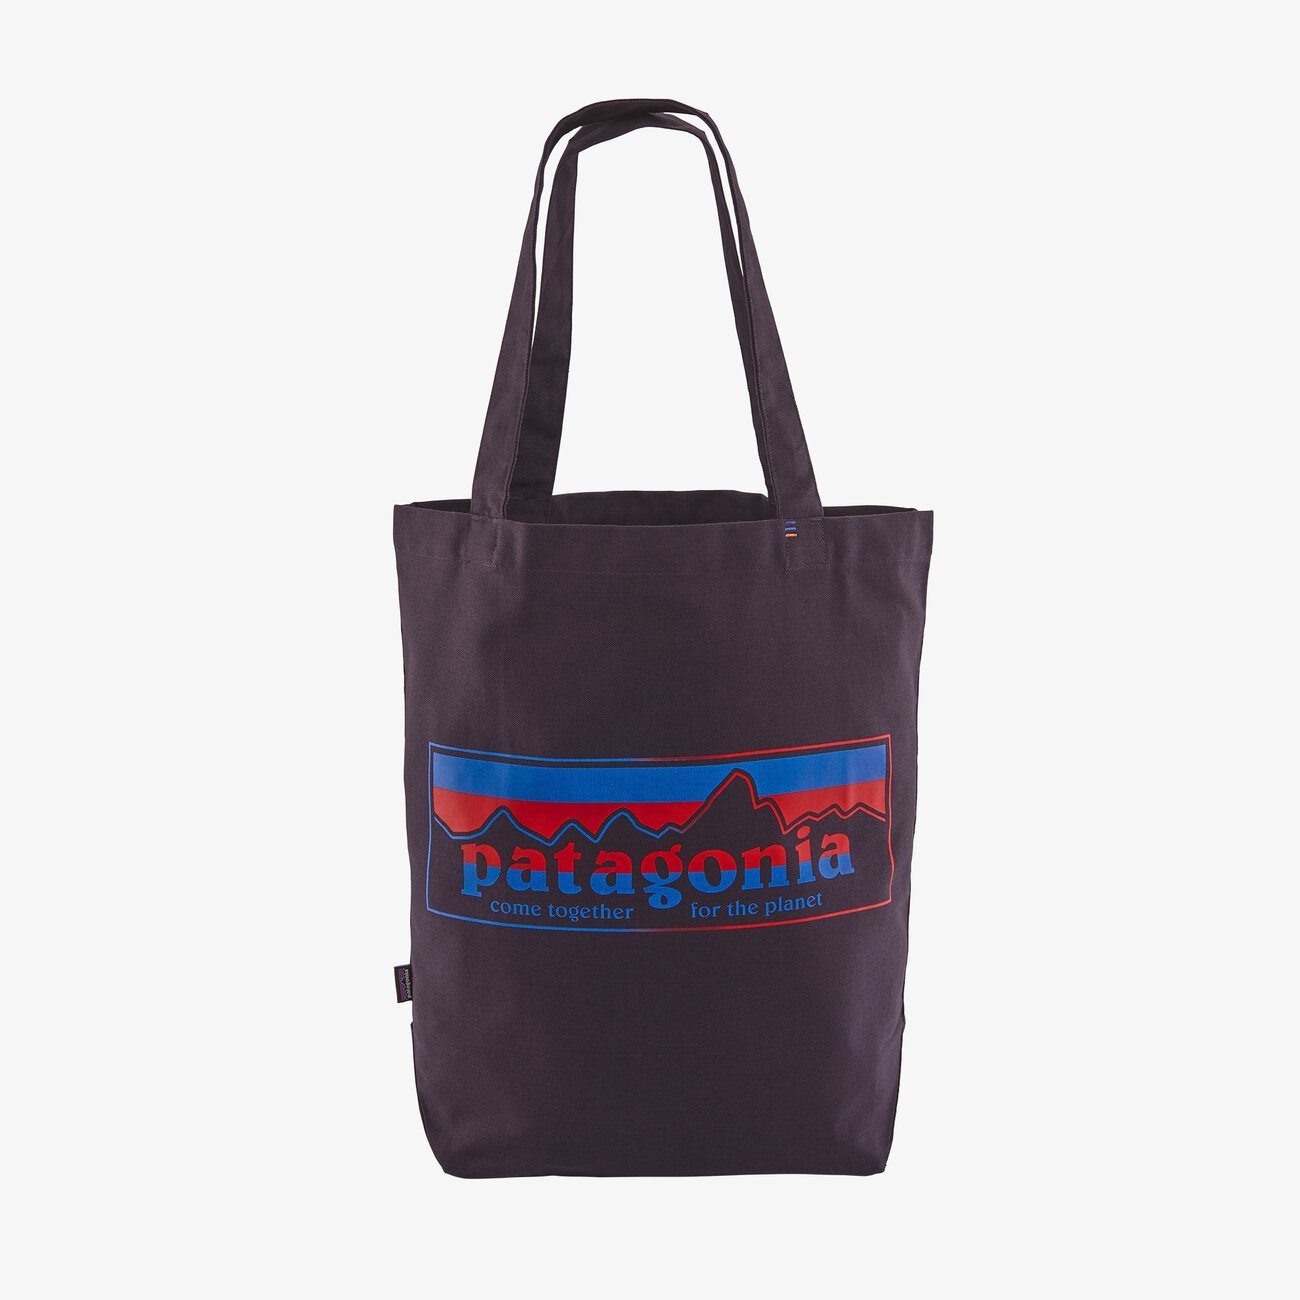 Patagonia Market Tote - Durable Bag from Organic Cotton, Together for the Planet Logo: Piton Purple